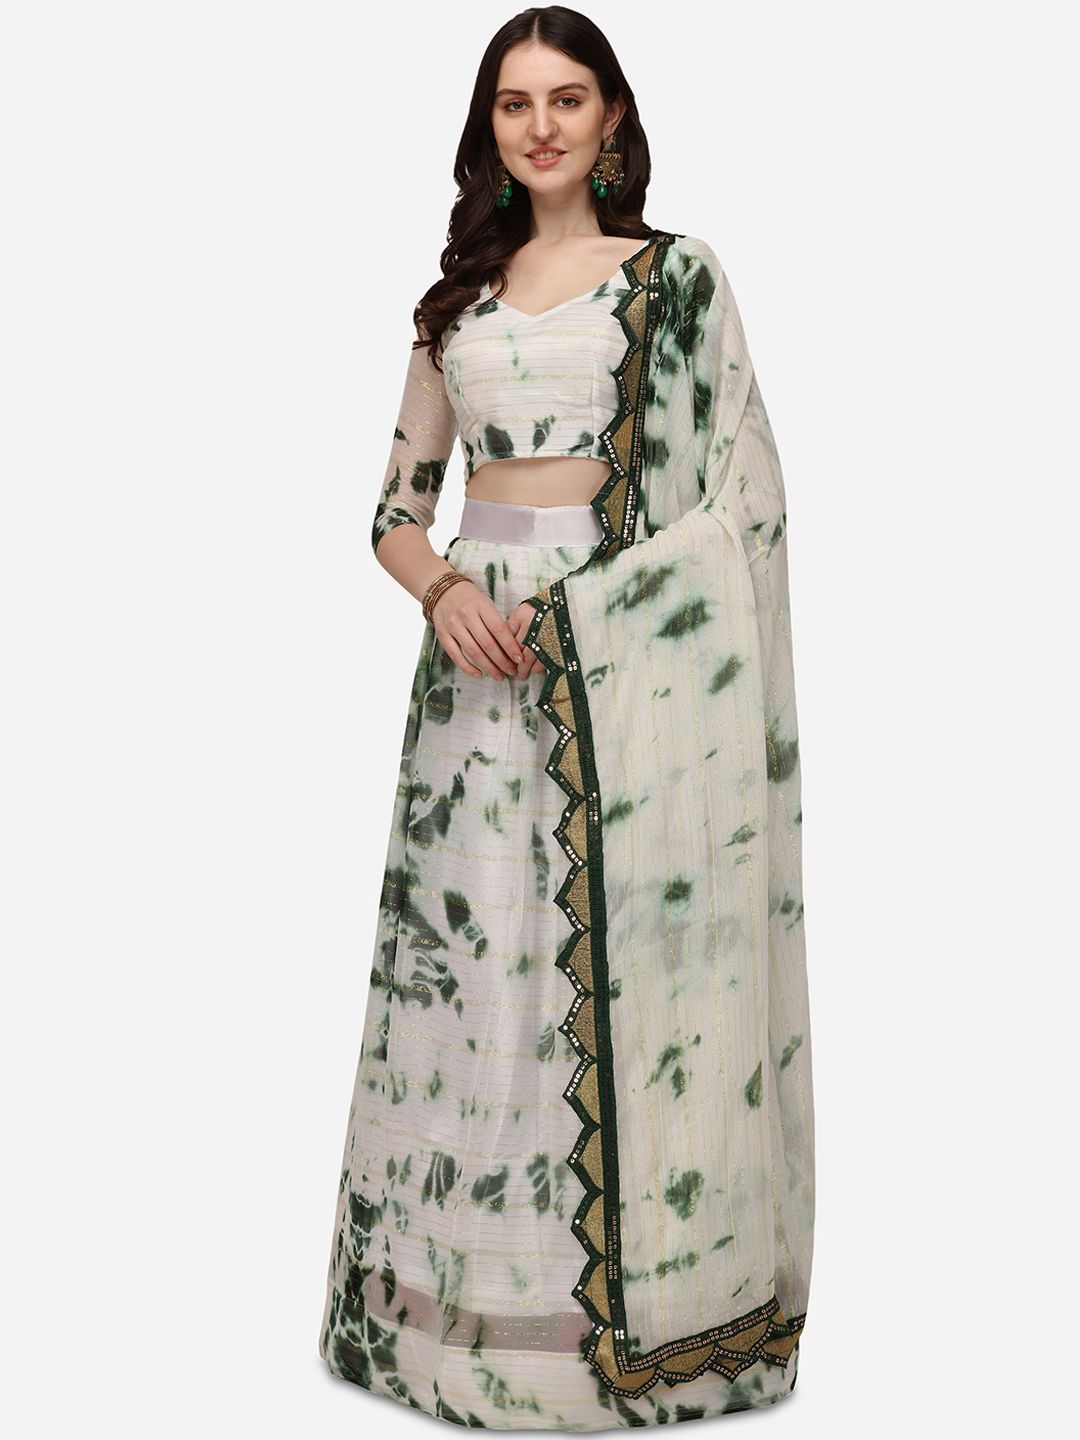 Pratham Blue White & Green Printed Semi-Stitched Lehenga & Unstitched Blouse With Dupatta Price in India